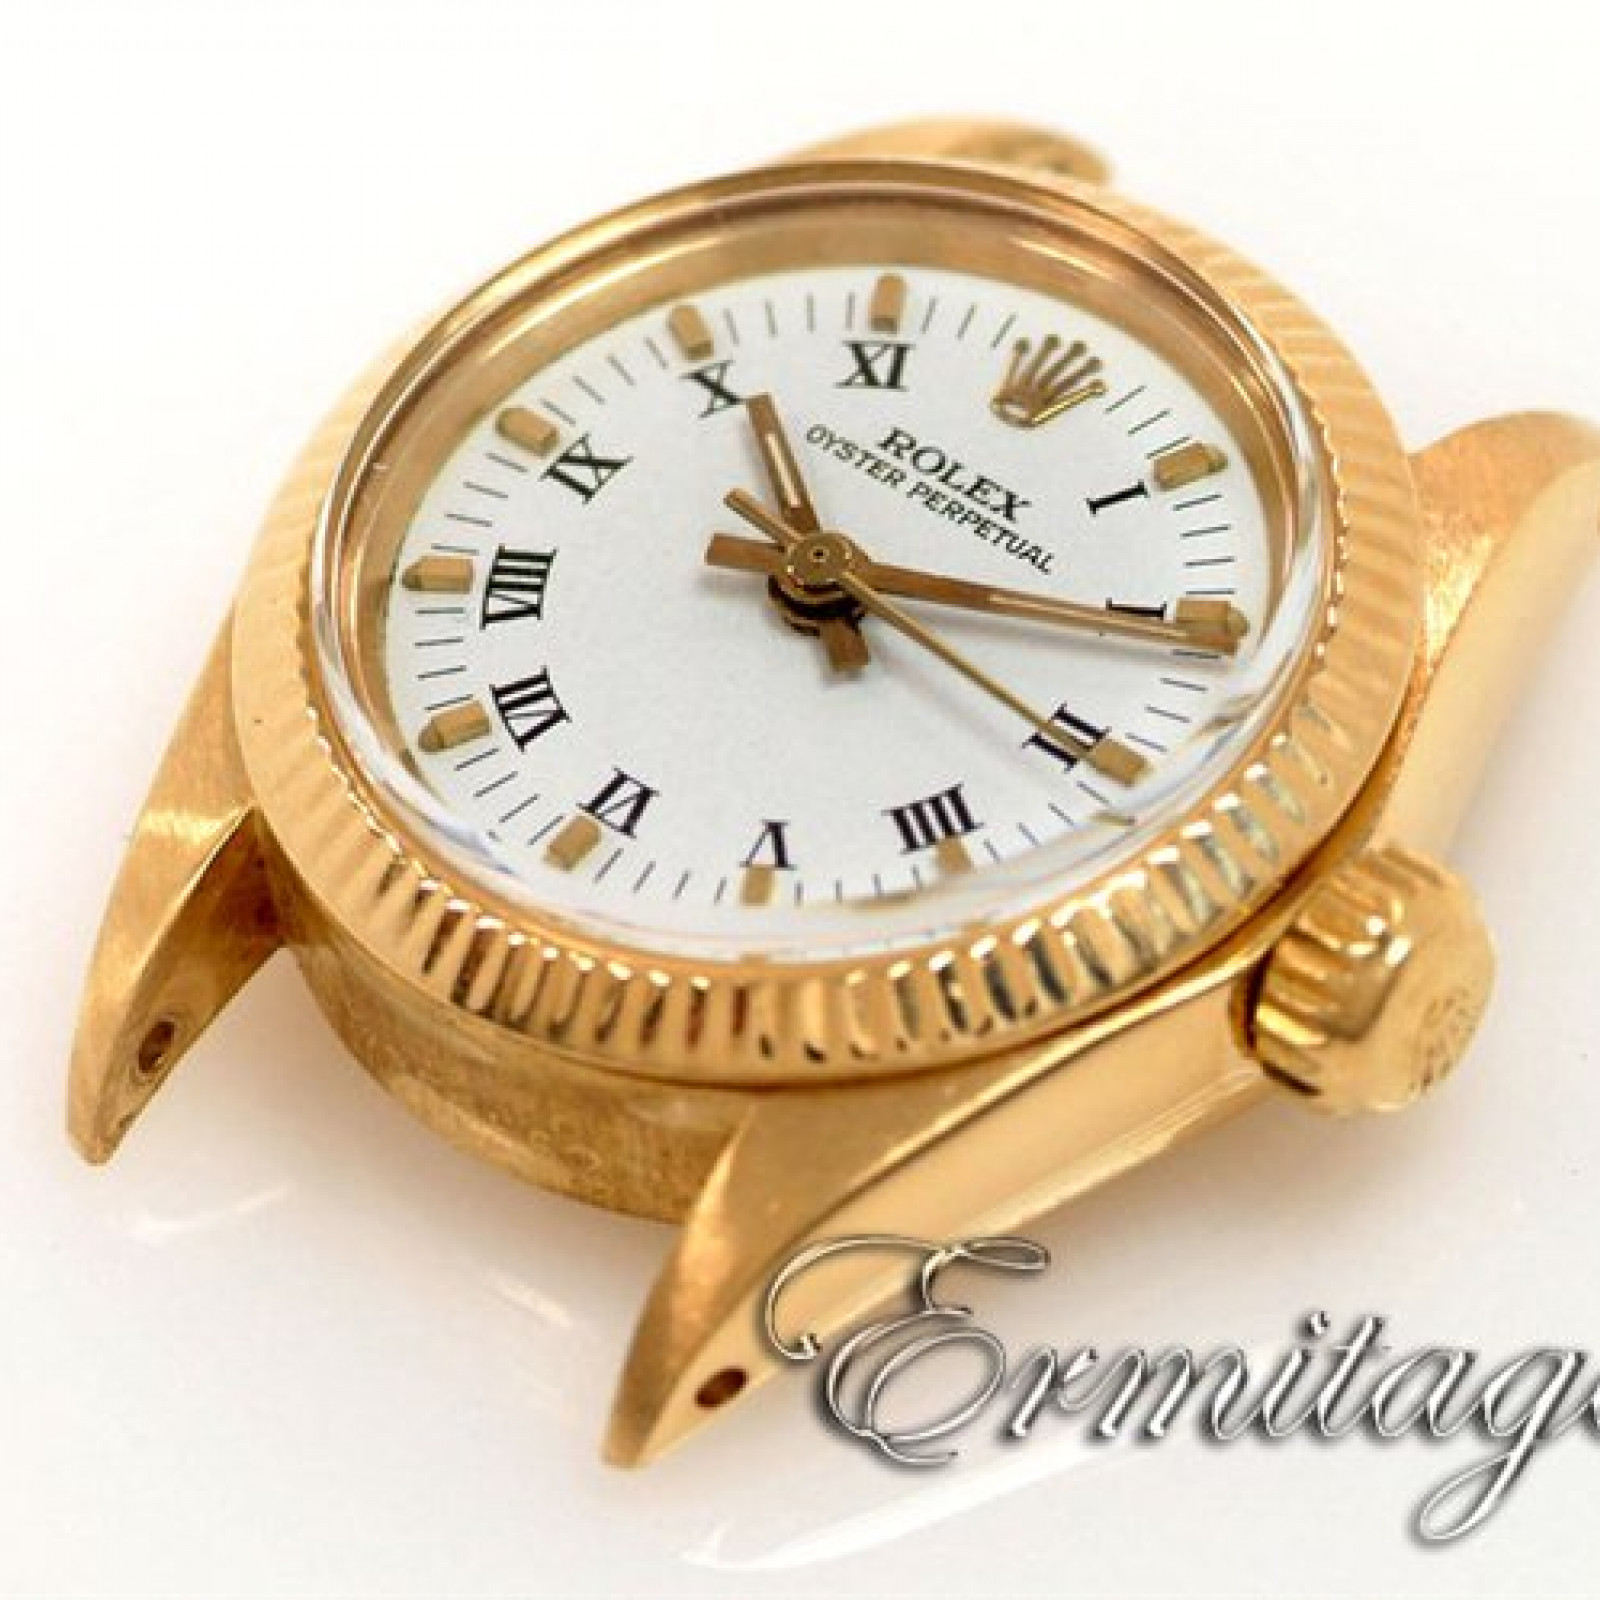 Vintage Rolex Oyster Perpetual 6719 Gold with White Dial